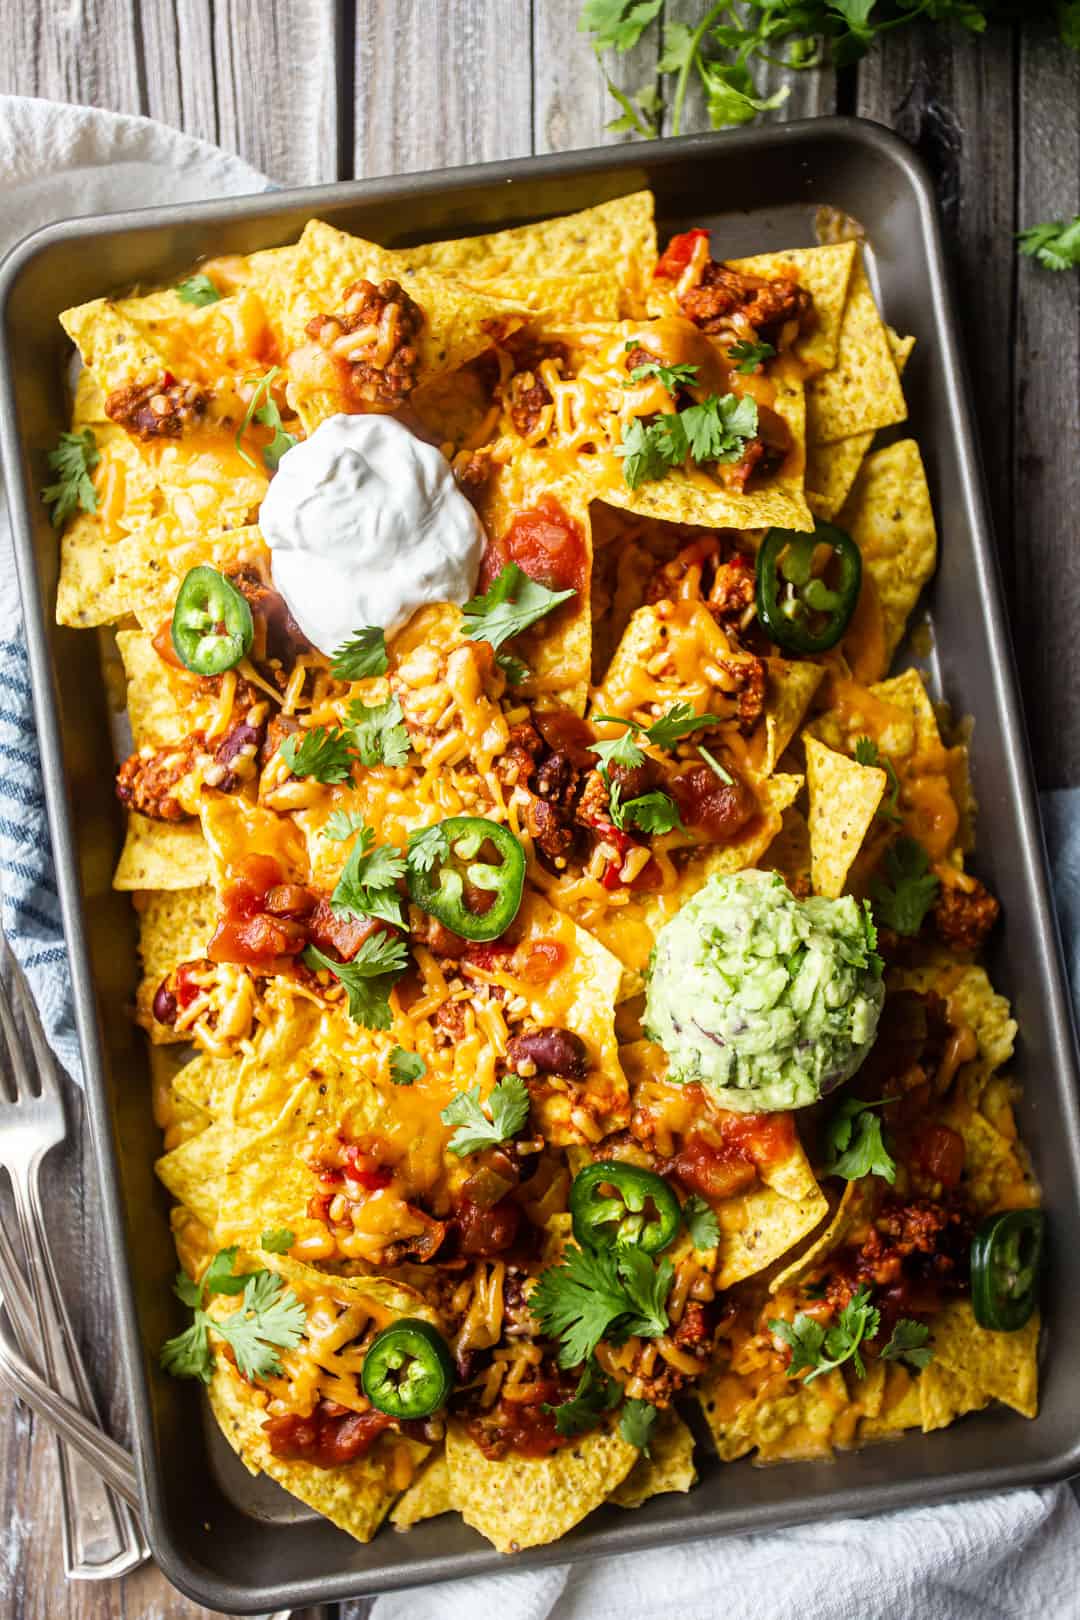 Overhead image of sheet pan nachos with chili, cheese, salsa, jalapenos, guacamole, sour cream, and cilantro.